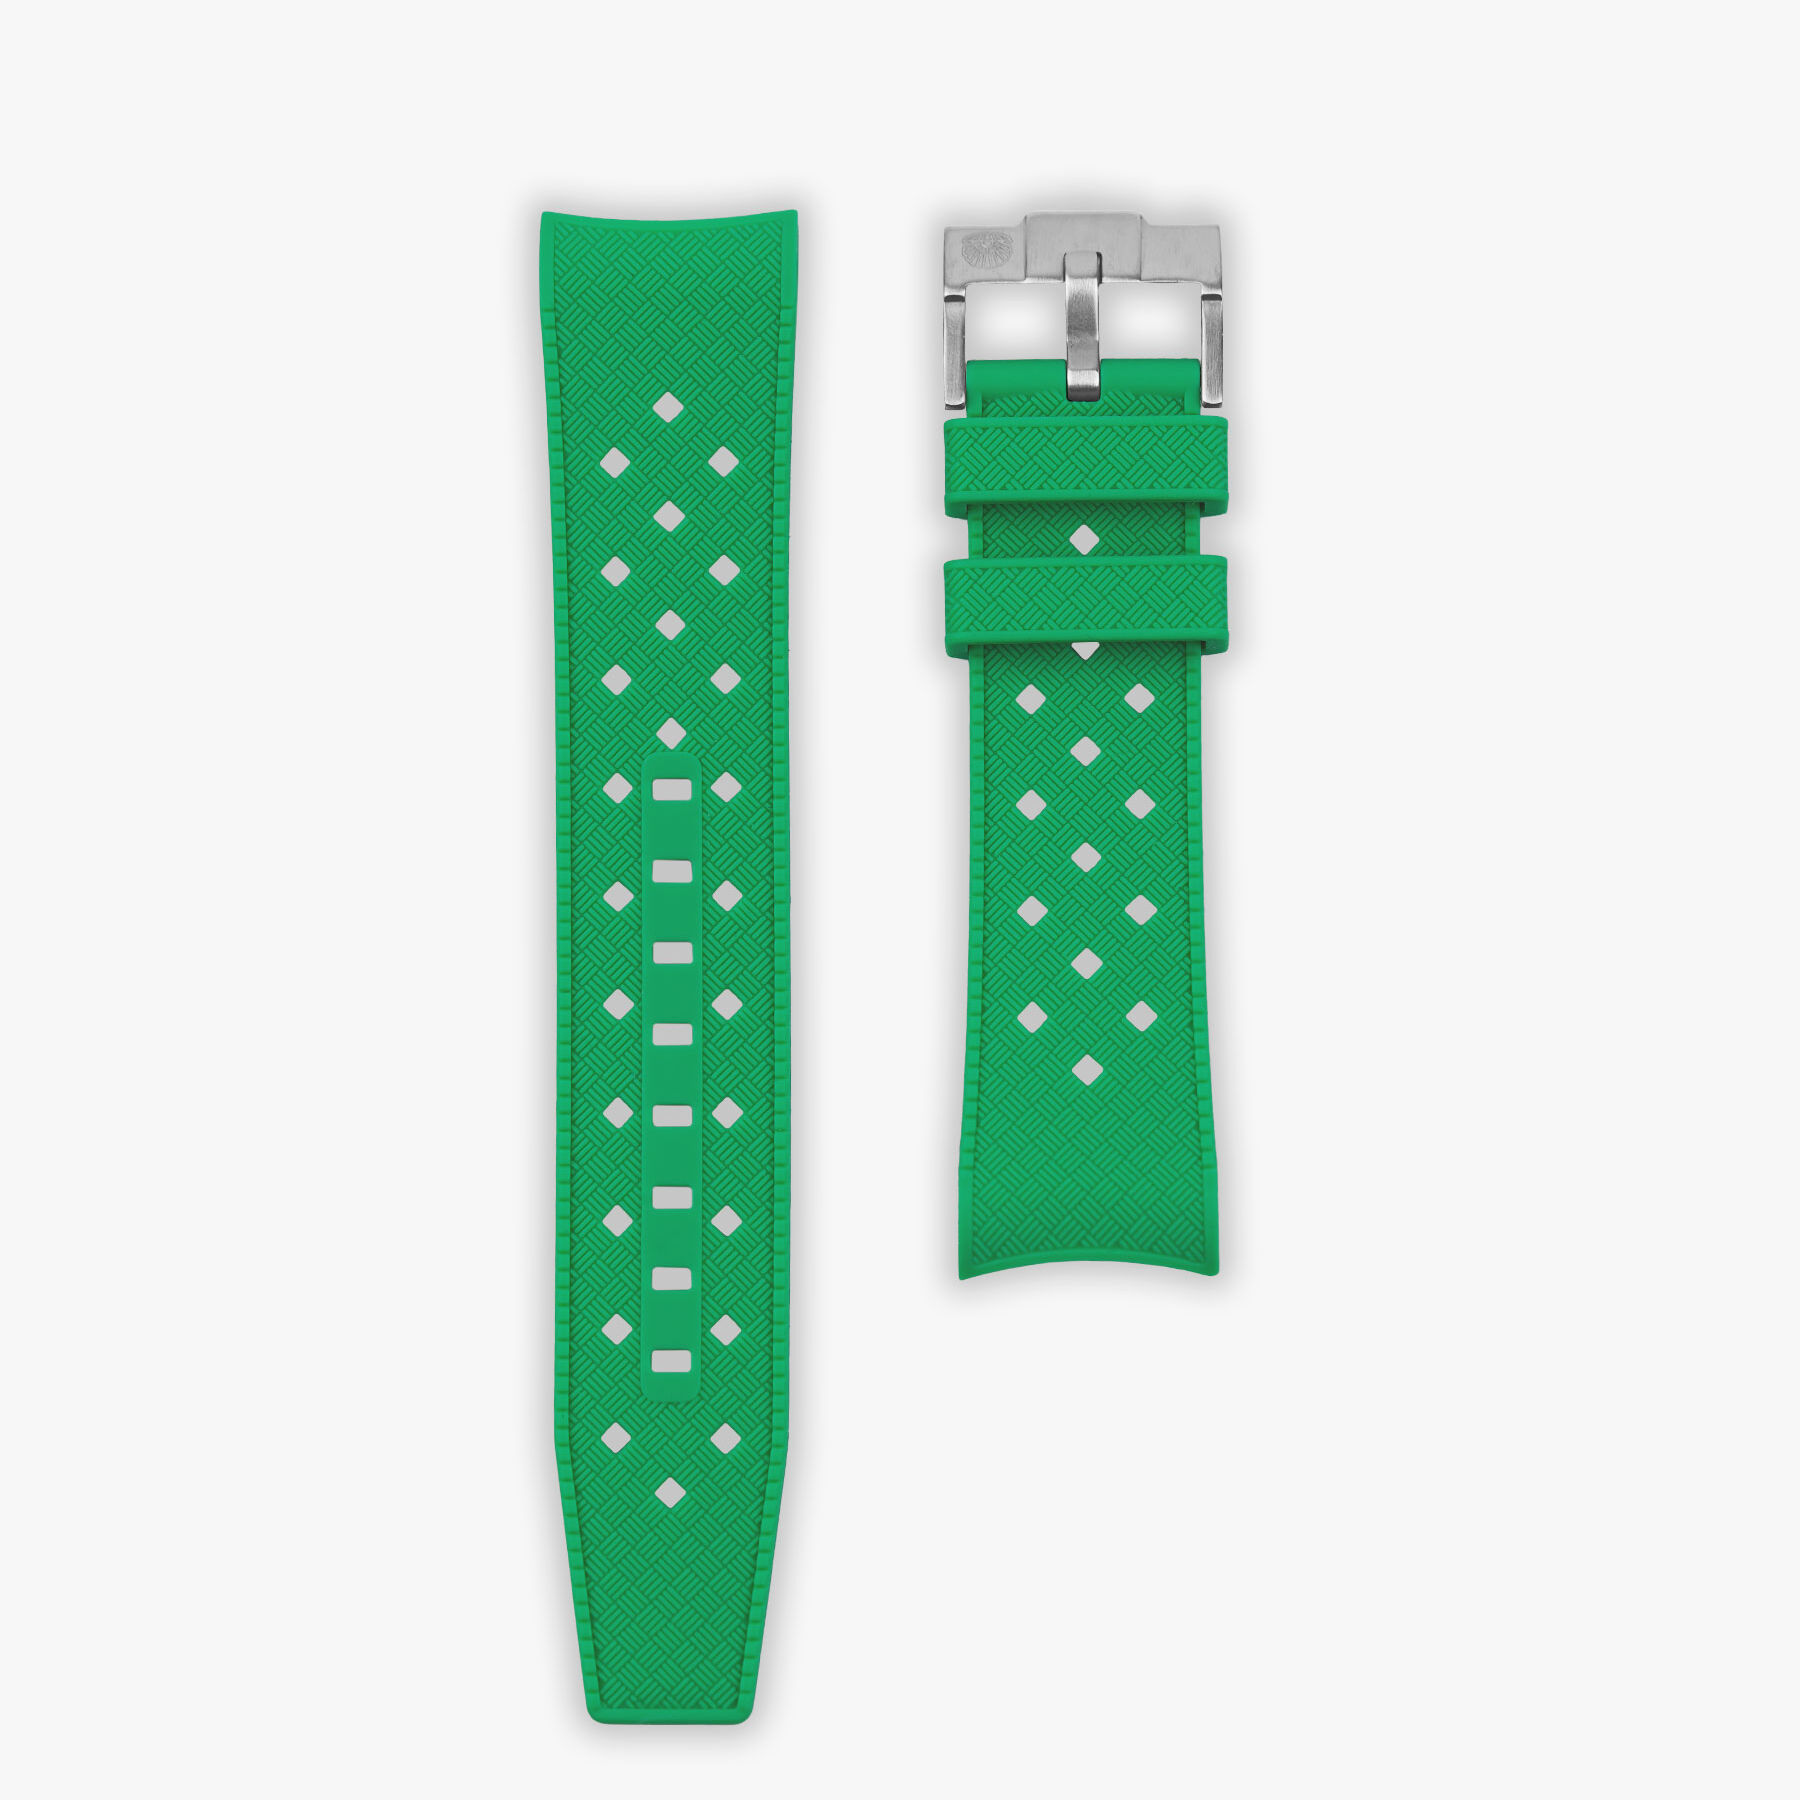 Blancpain X Swatch Indian Green